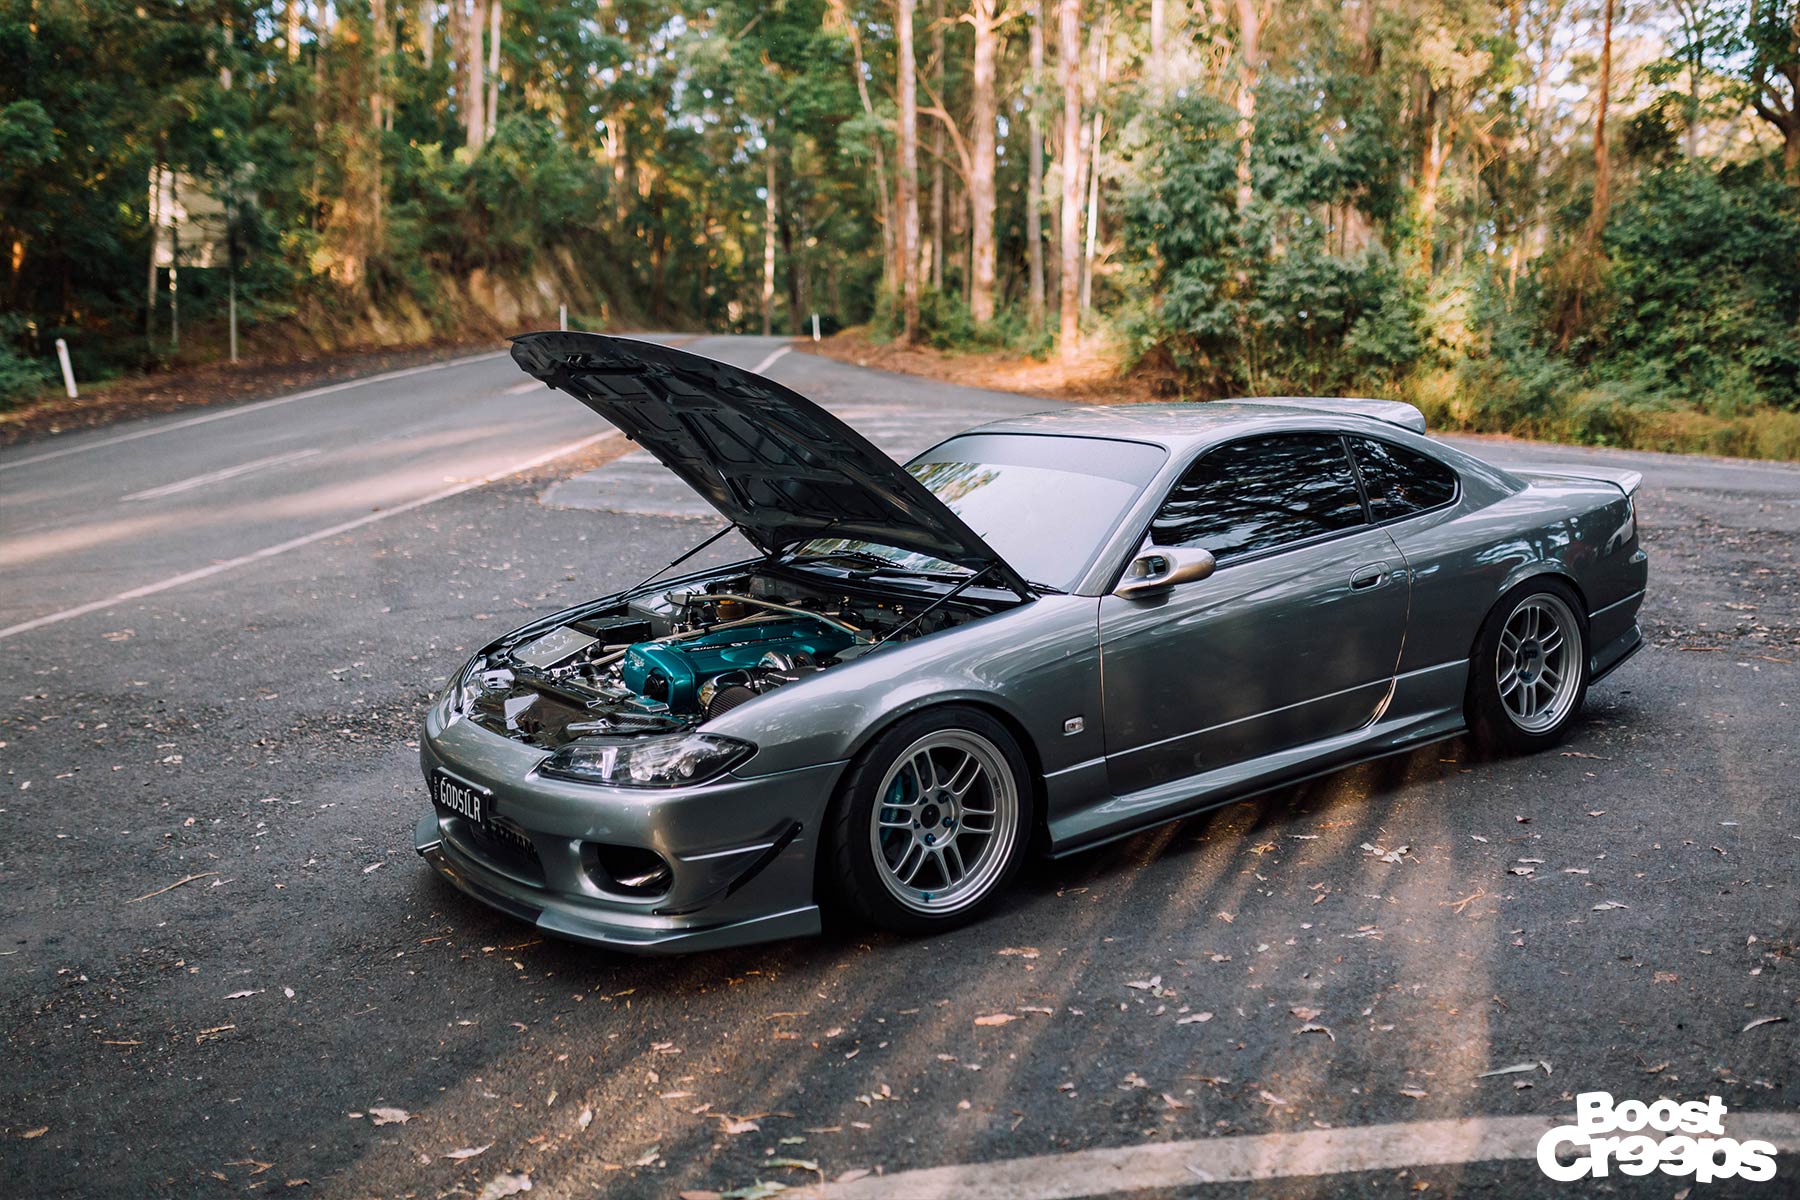 Jordan’s RB26 Powered S15 Is The Perfect Street Car